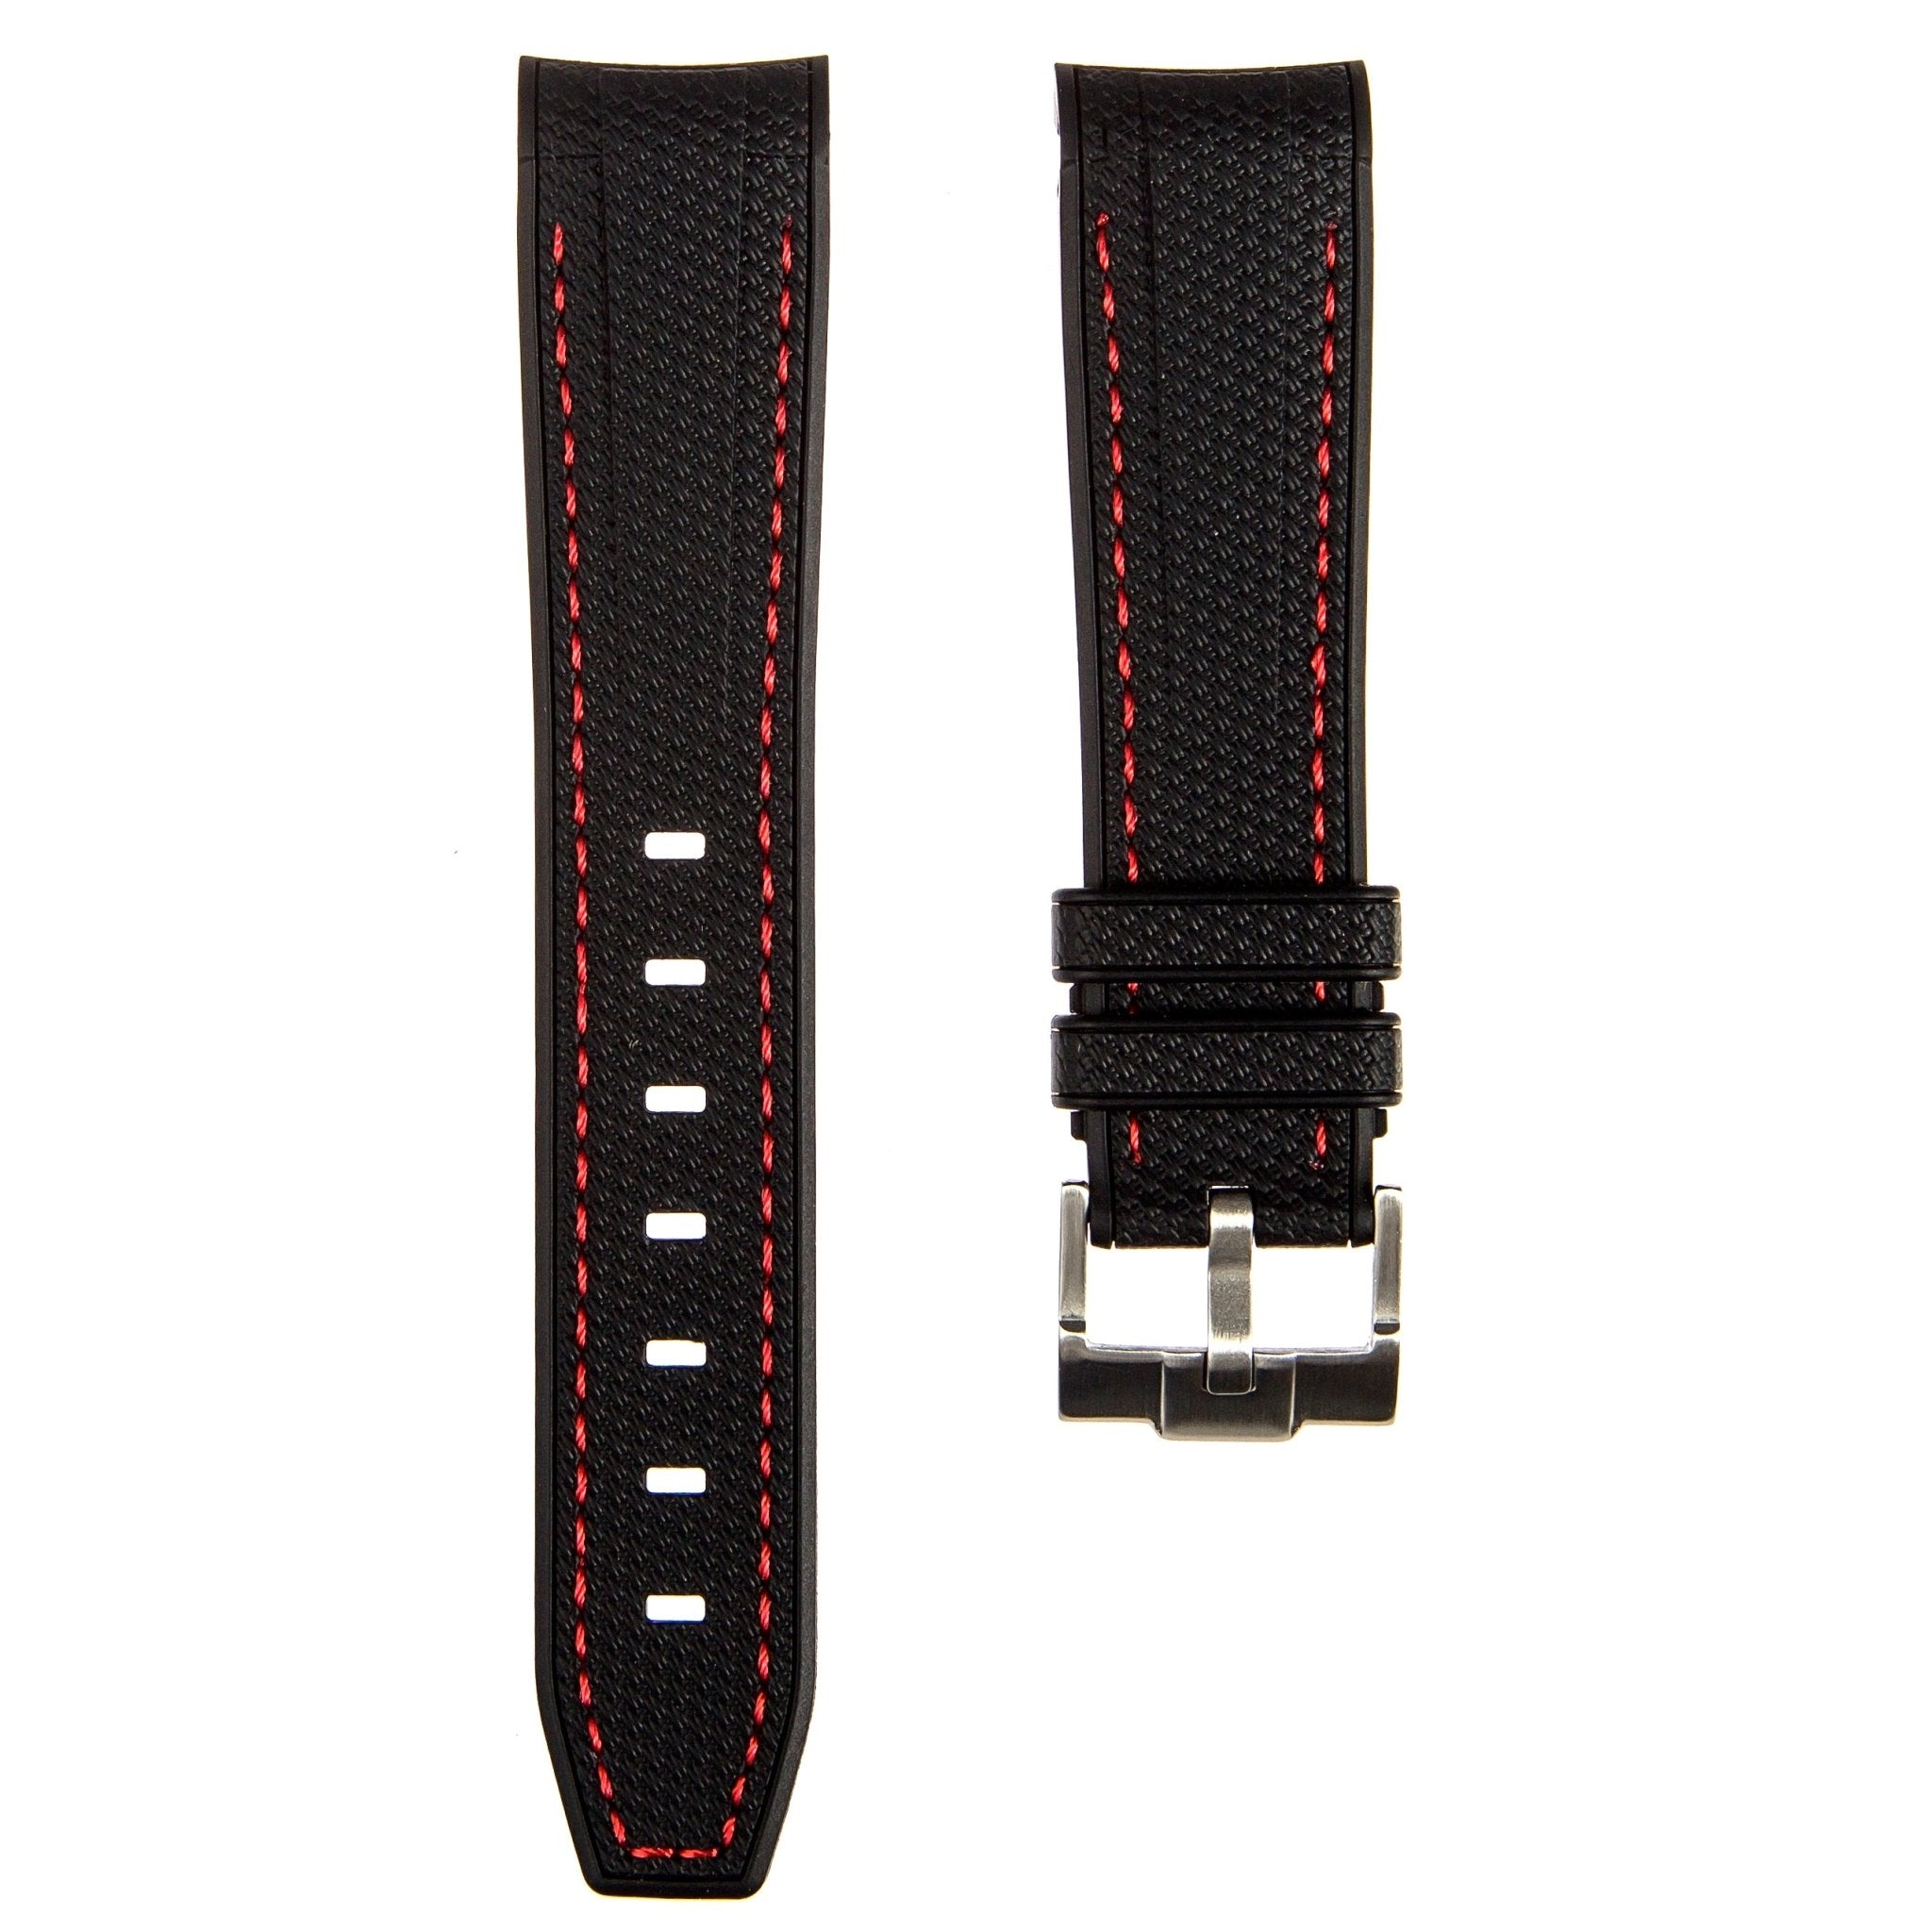 Textured Curved End Premium Silicone Strap - Black with Red Stitch (2405) -StrapSeeker